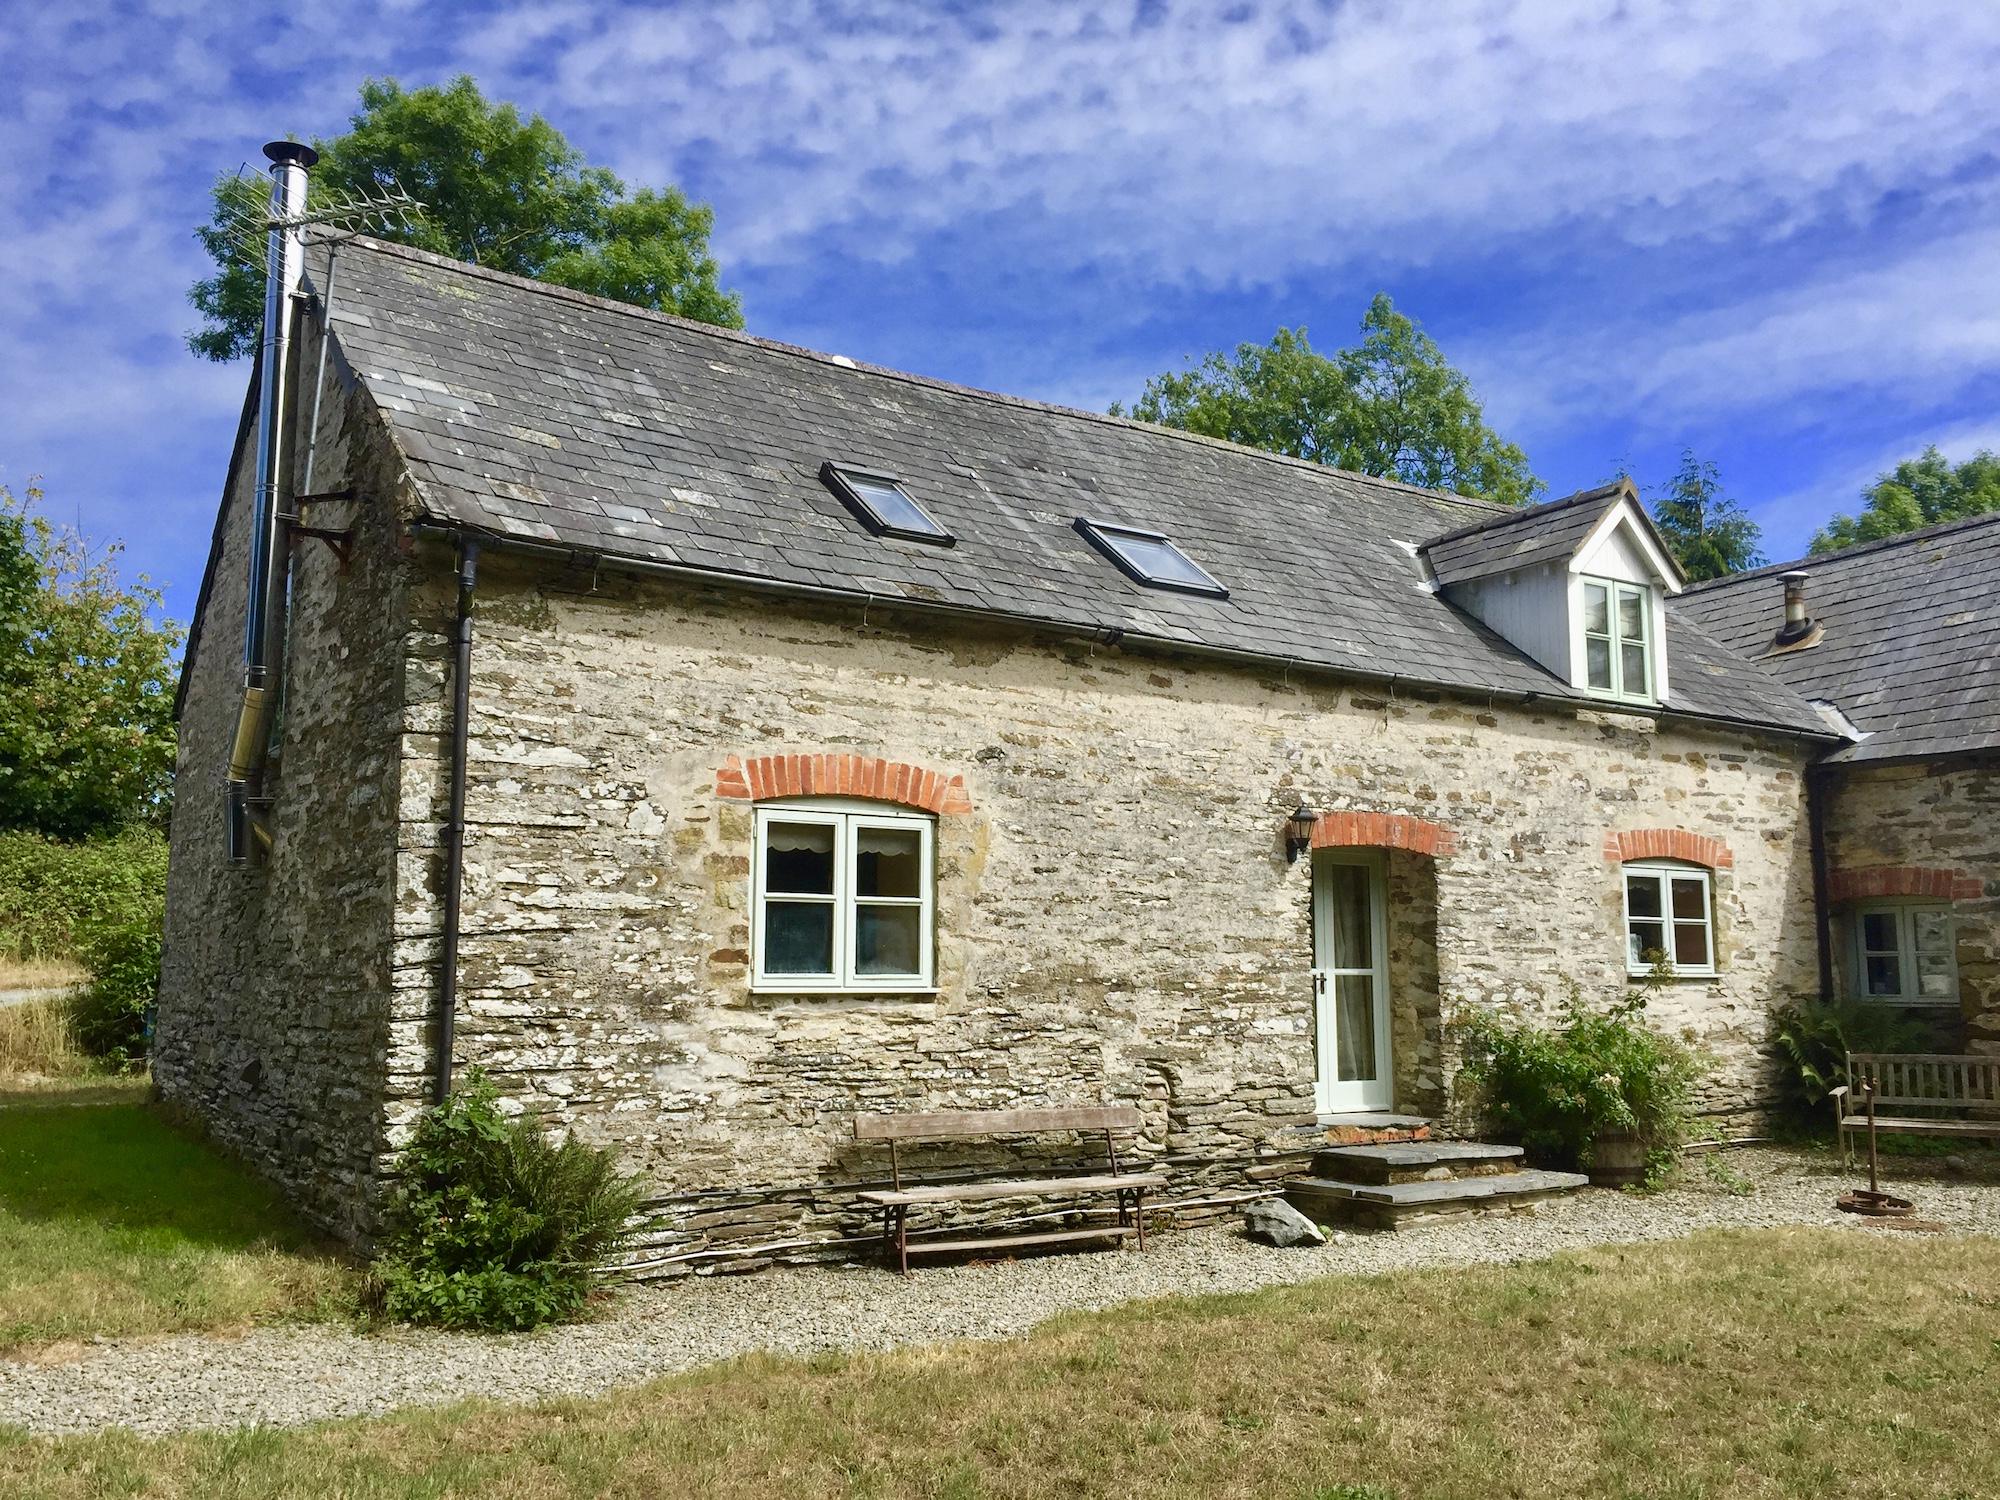 Self-Catering in Mid Wales holidays at Cool Places